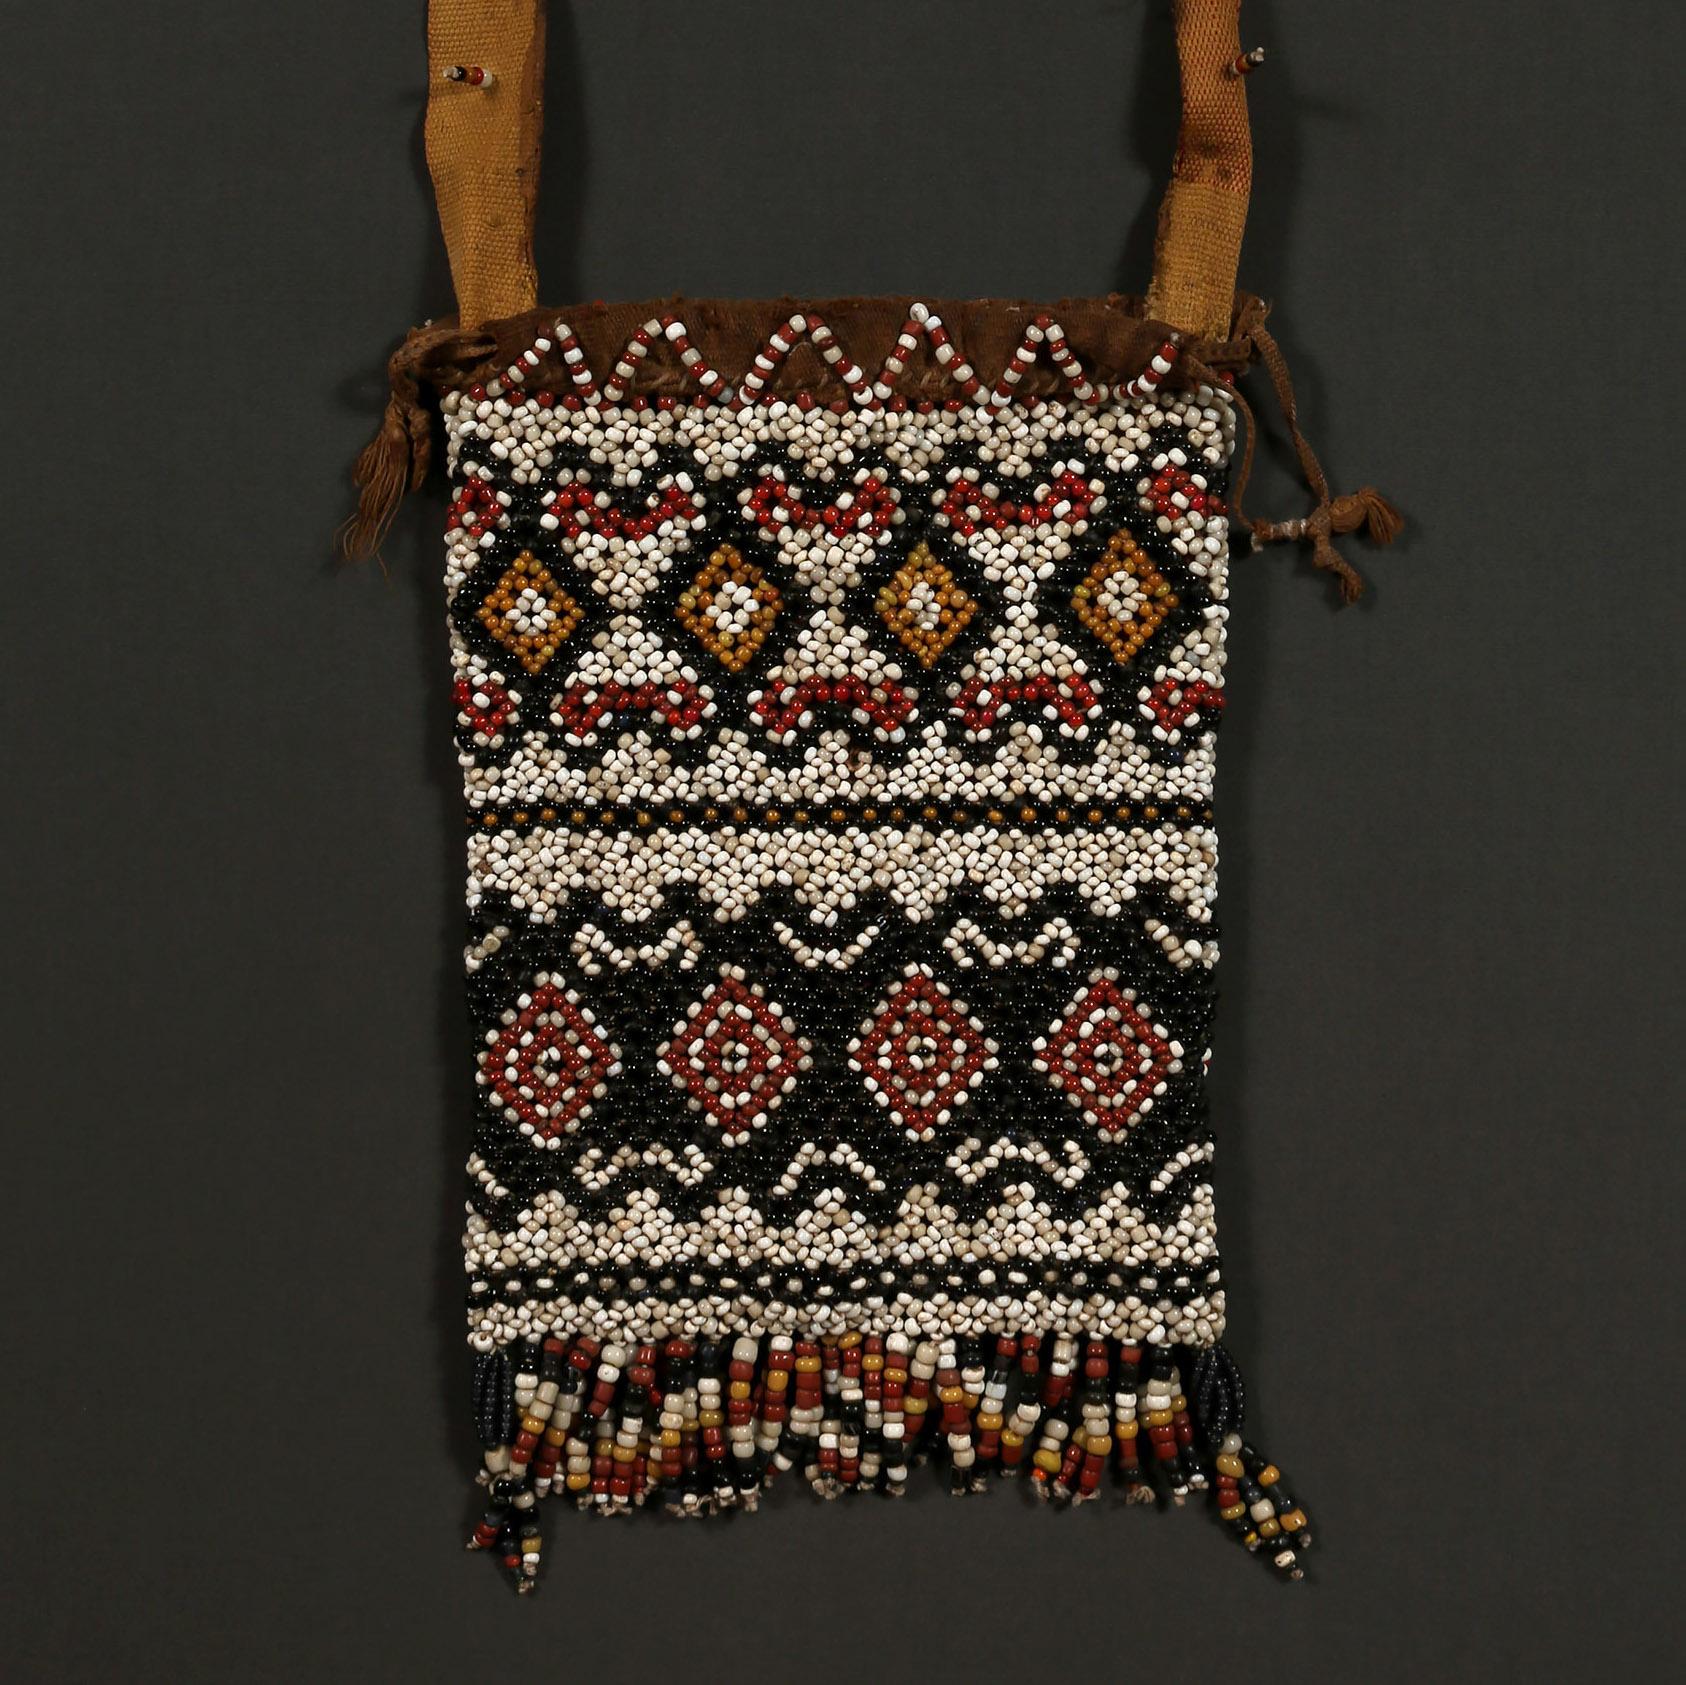 Sumatran beaded betel bag made of glass trade beads from early to mid-20th century.